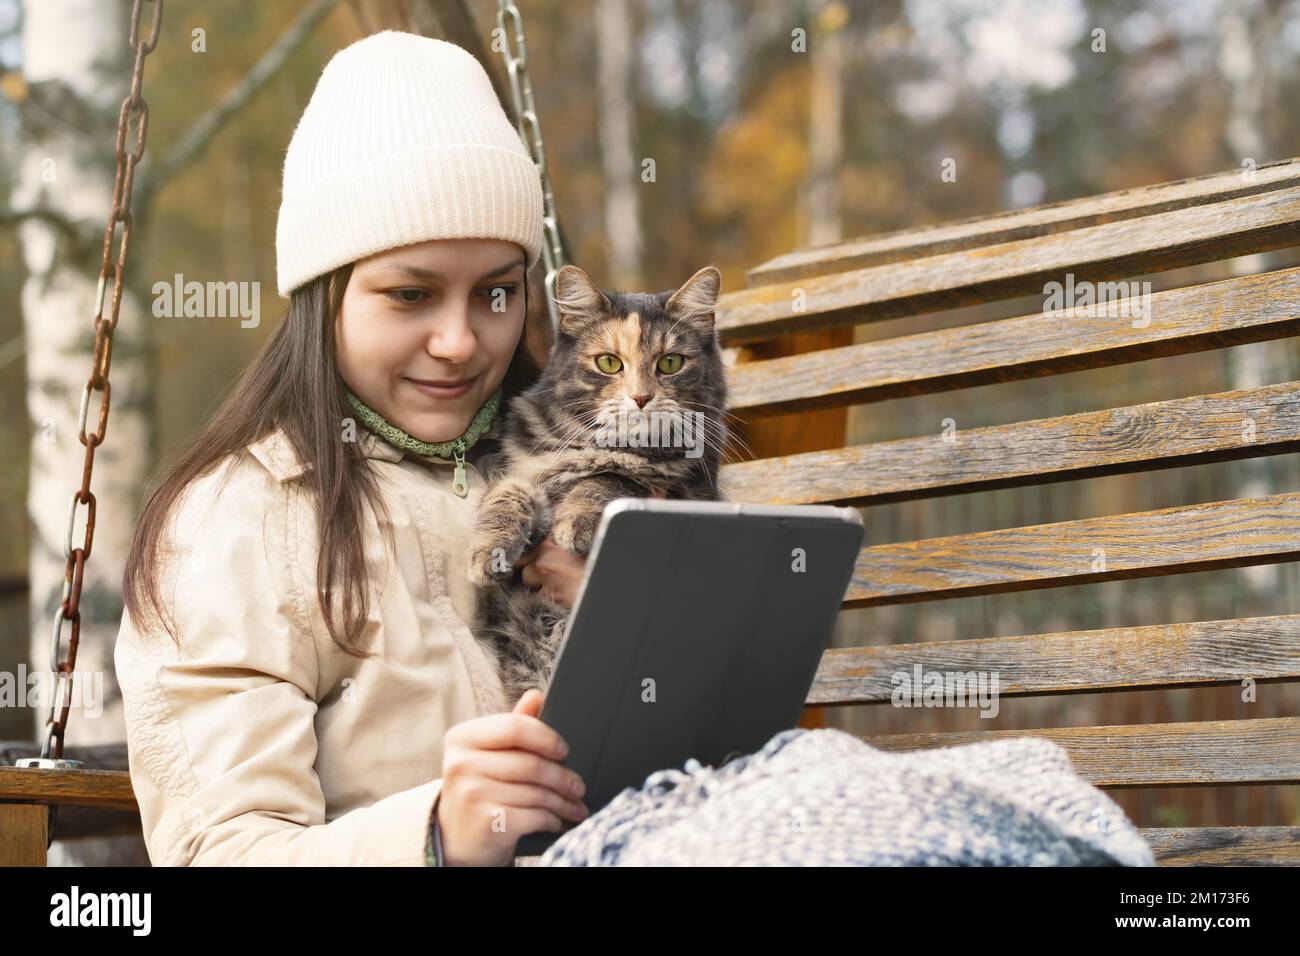 Girl uses a tablet while sitting on a bench in an autumn park with a cat in her arms. Stock Photo